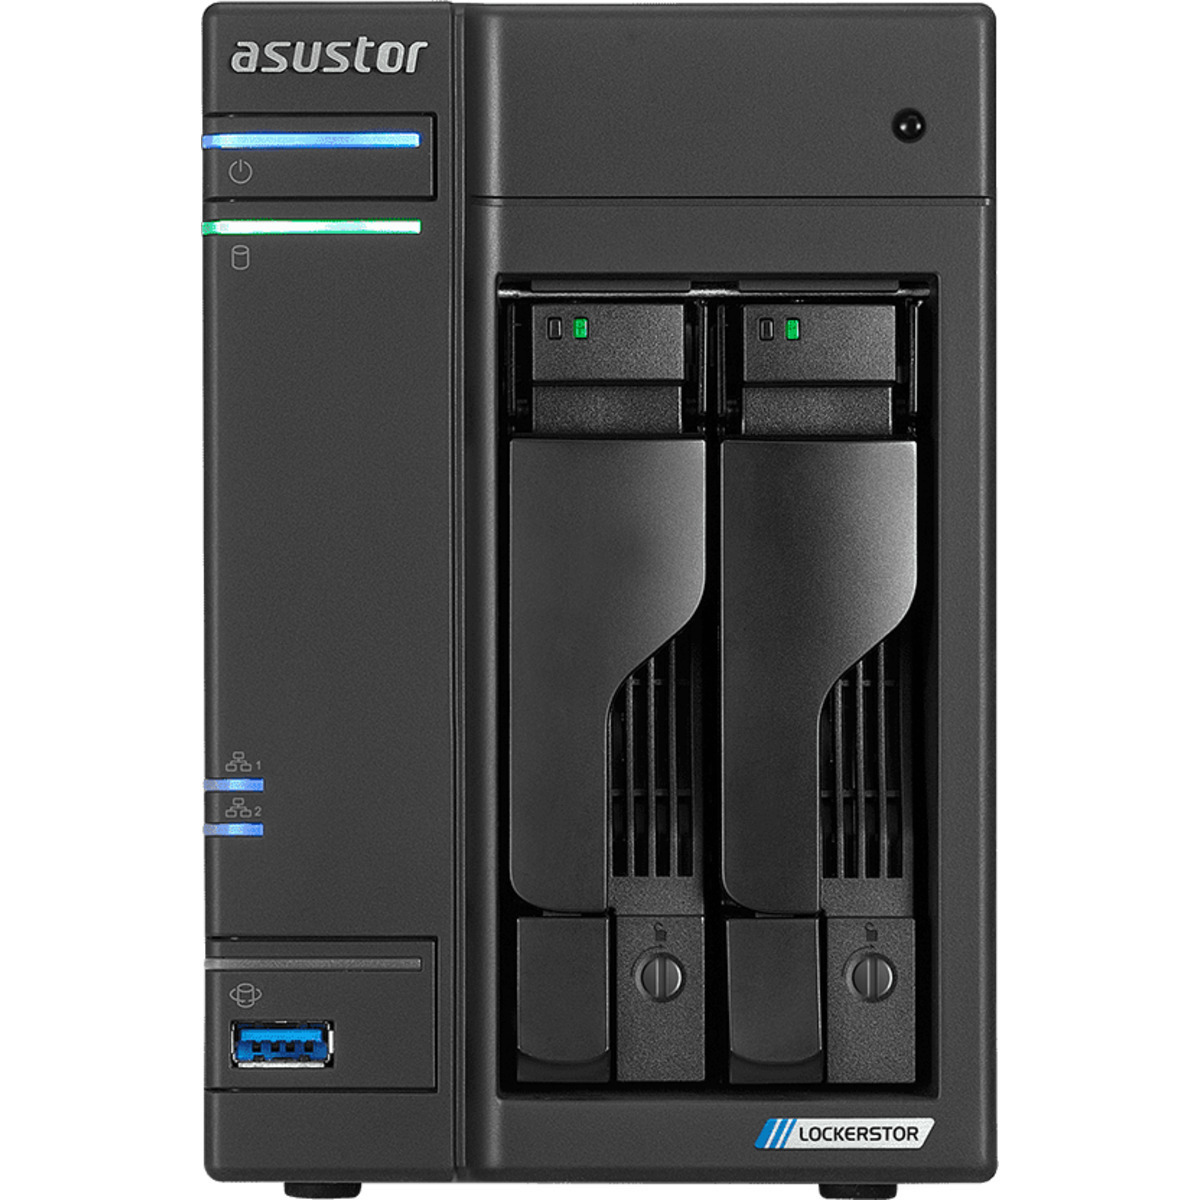 buy $2337 ASUSTOR AS6602T Lockerstor 2 16tb Desktop NAS - Network Attached Storage Device 2x8000gb Samsung 870 QVO MZ-77Q8T0 2.5 SATA 6Gb/s SSD CONSUMER Class Drives Installed - Burn-In Tested - FREE RAM UPGRADE - nas headquarters buy network attached storage server device das new raid-5 free shipping usa christmas new year holiday sale AS6602T Lockerstor 2